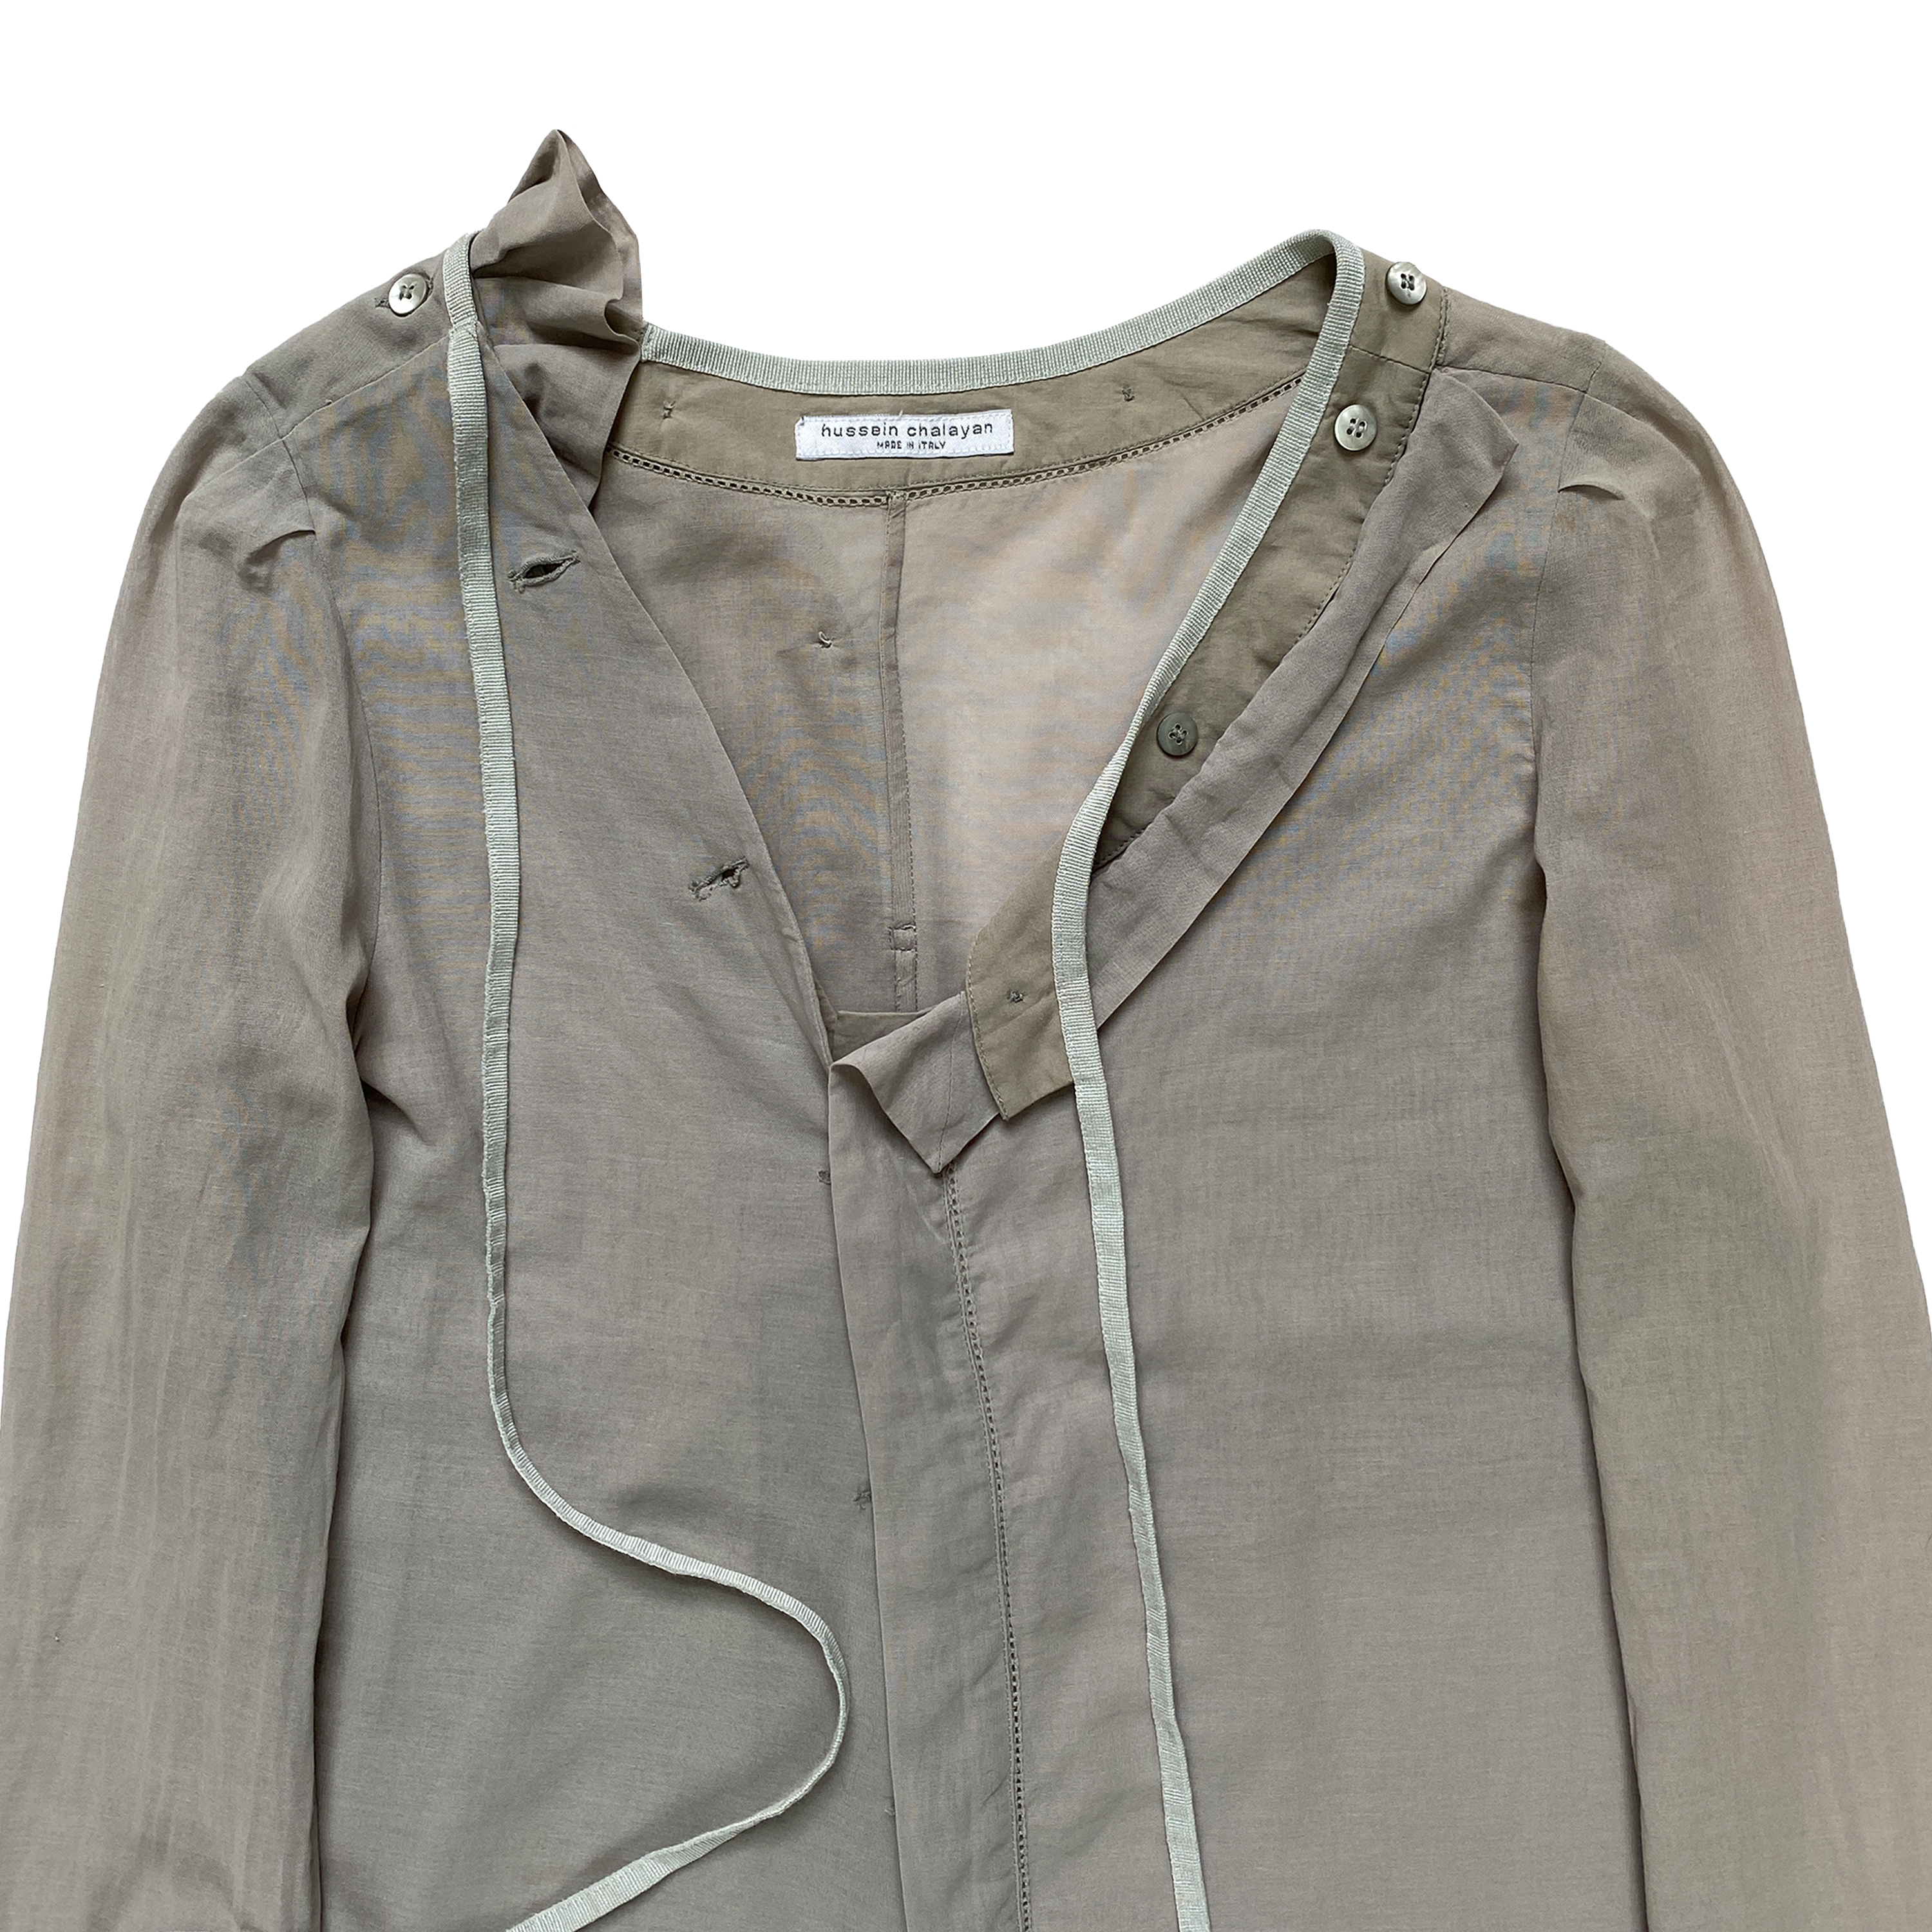 Hussein Chalayan, S/S 2002 Deconstructed Mesh String Shirt - La